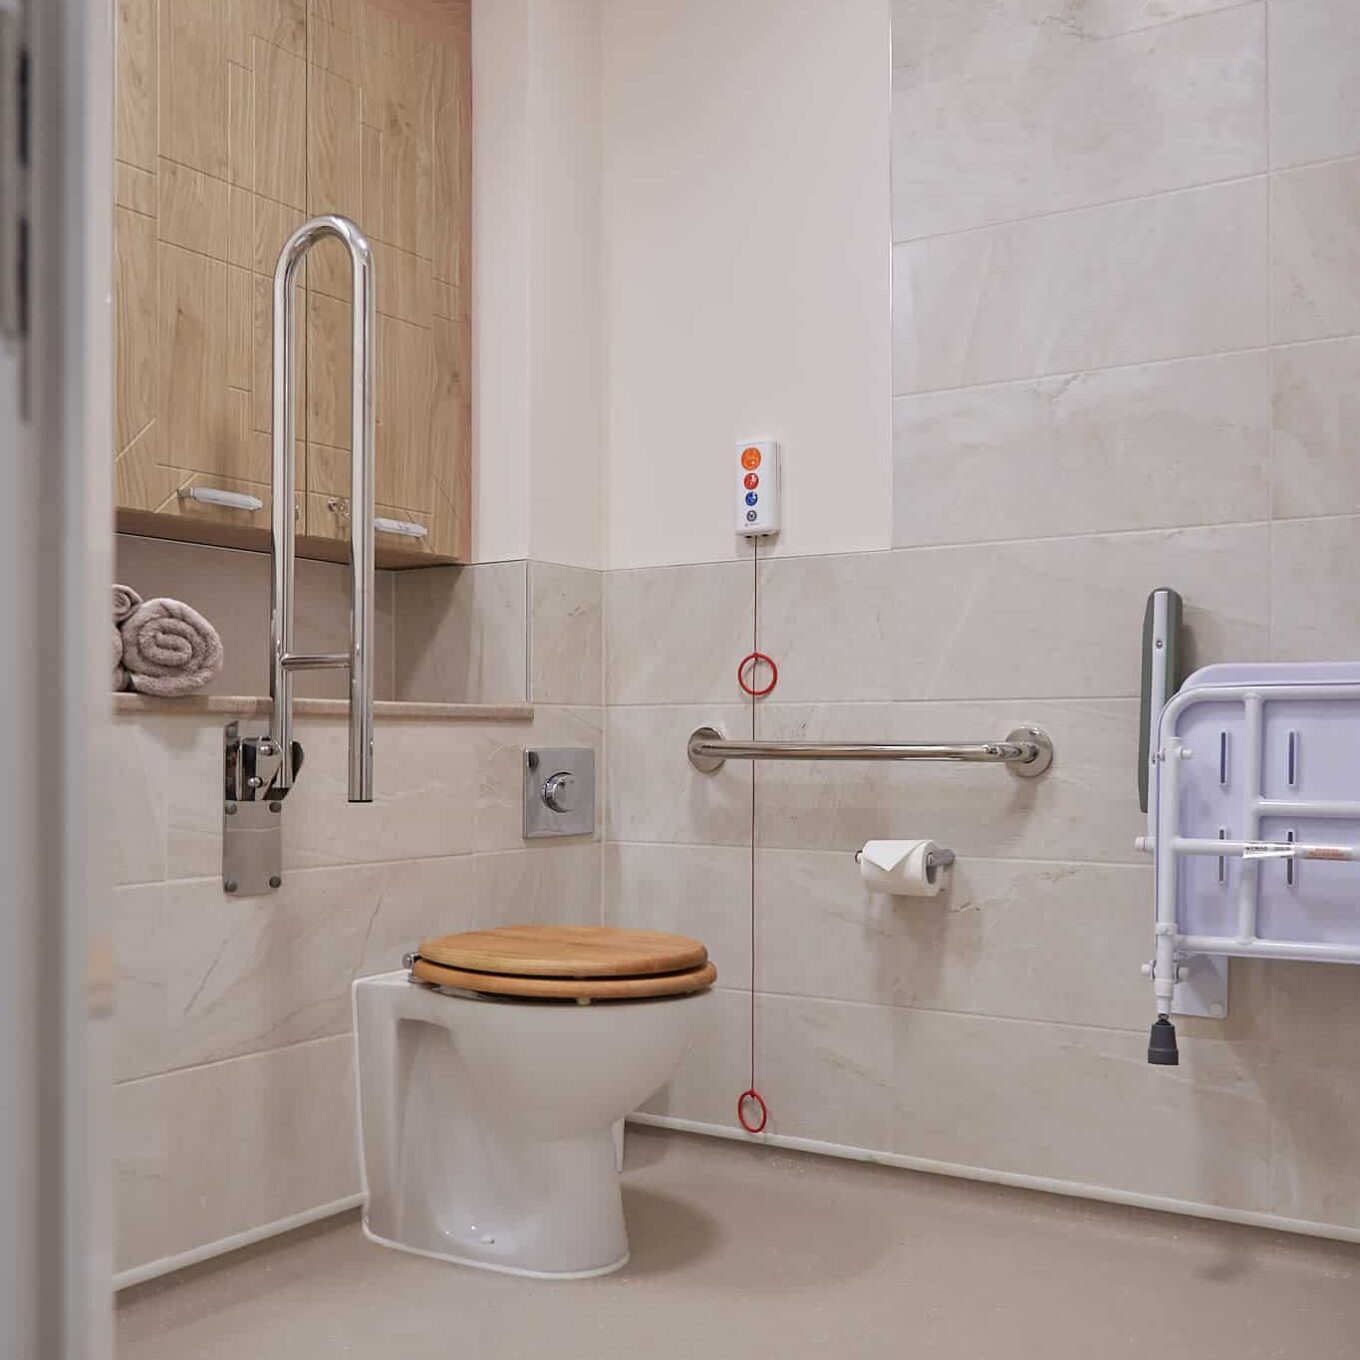 Bathroom with toilet and emergency cord at Lambwood Heights Care Home in Chigwell